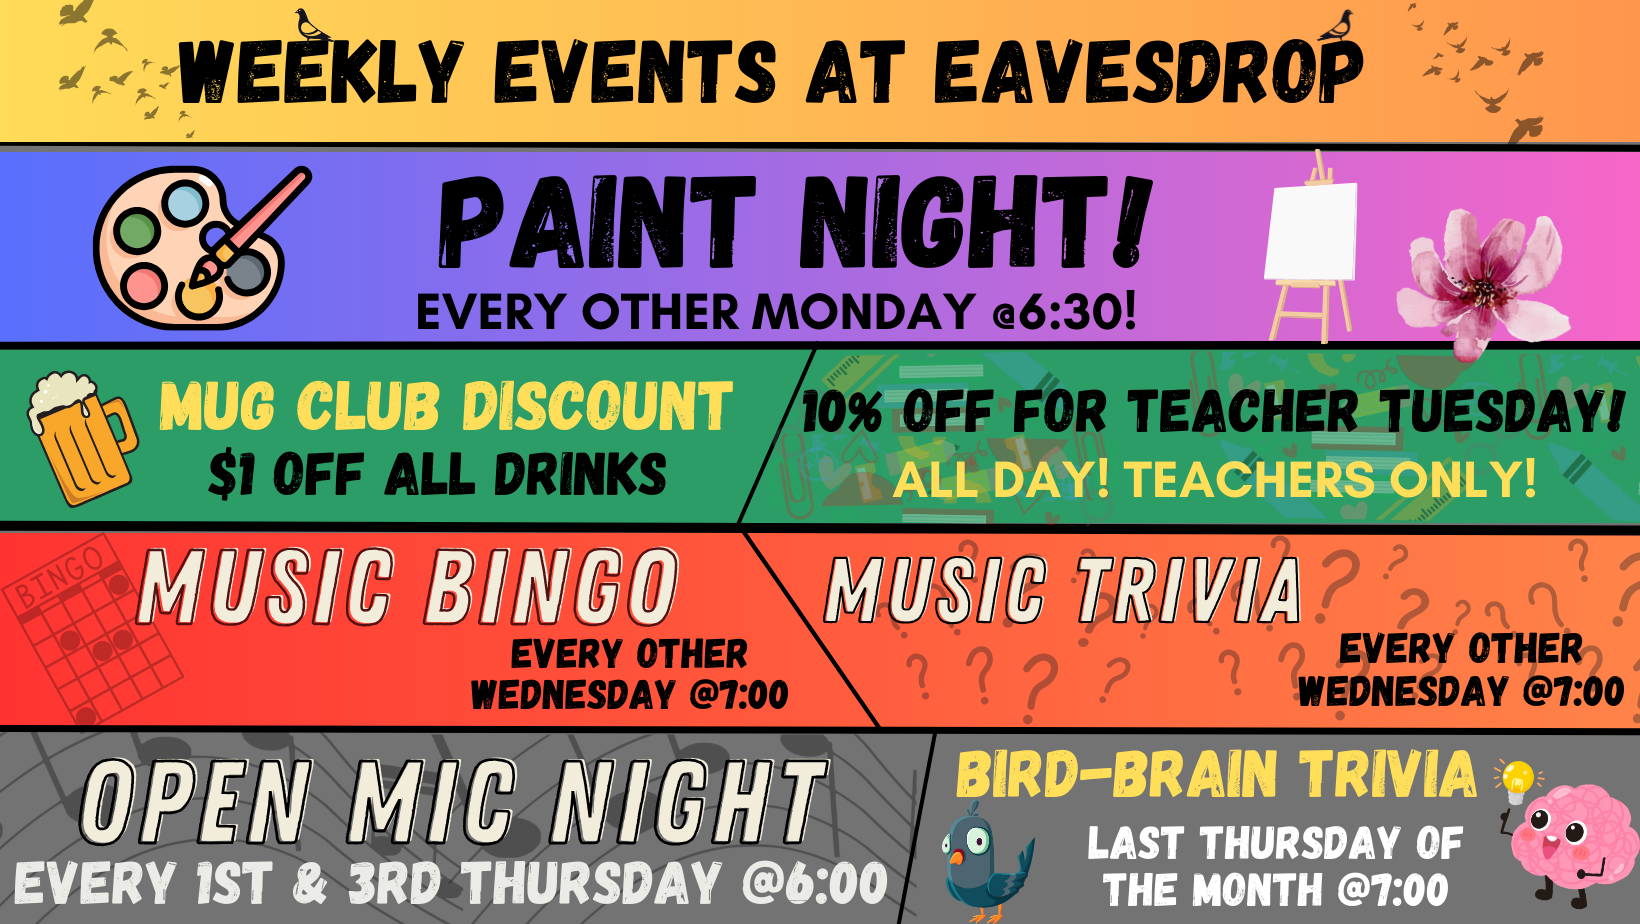 Weekly events information. Paint Nite, Trivia, Bingo, and Open Mic Night